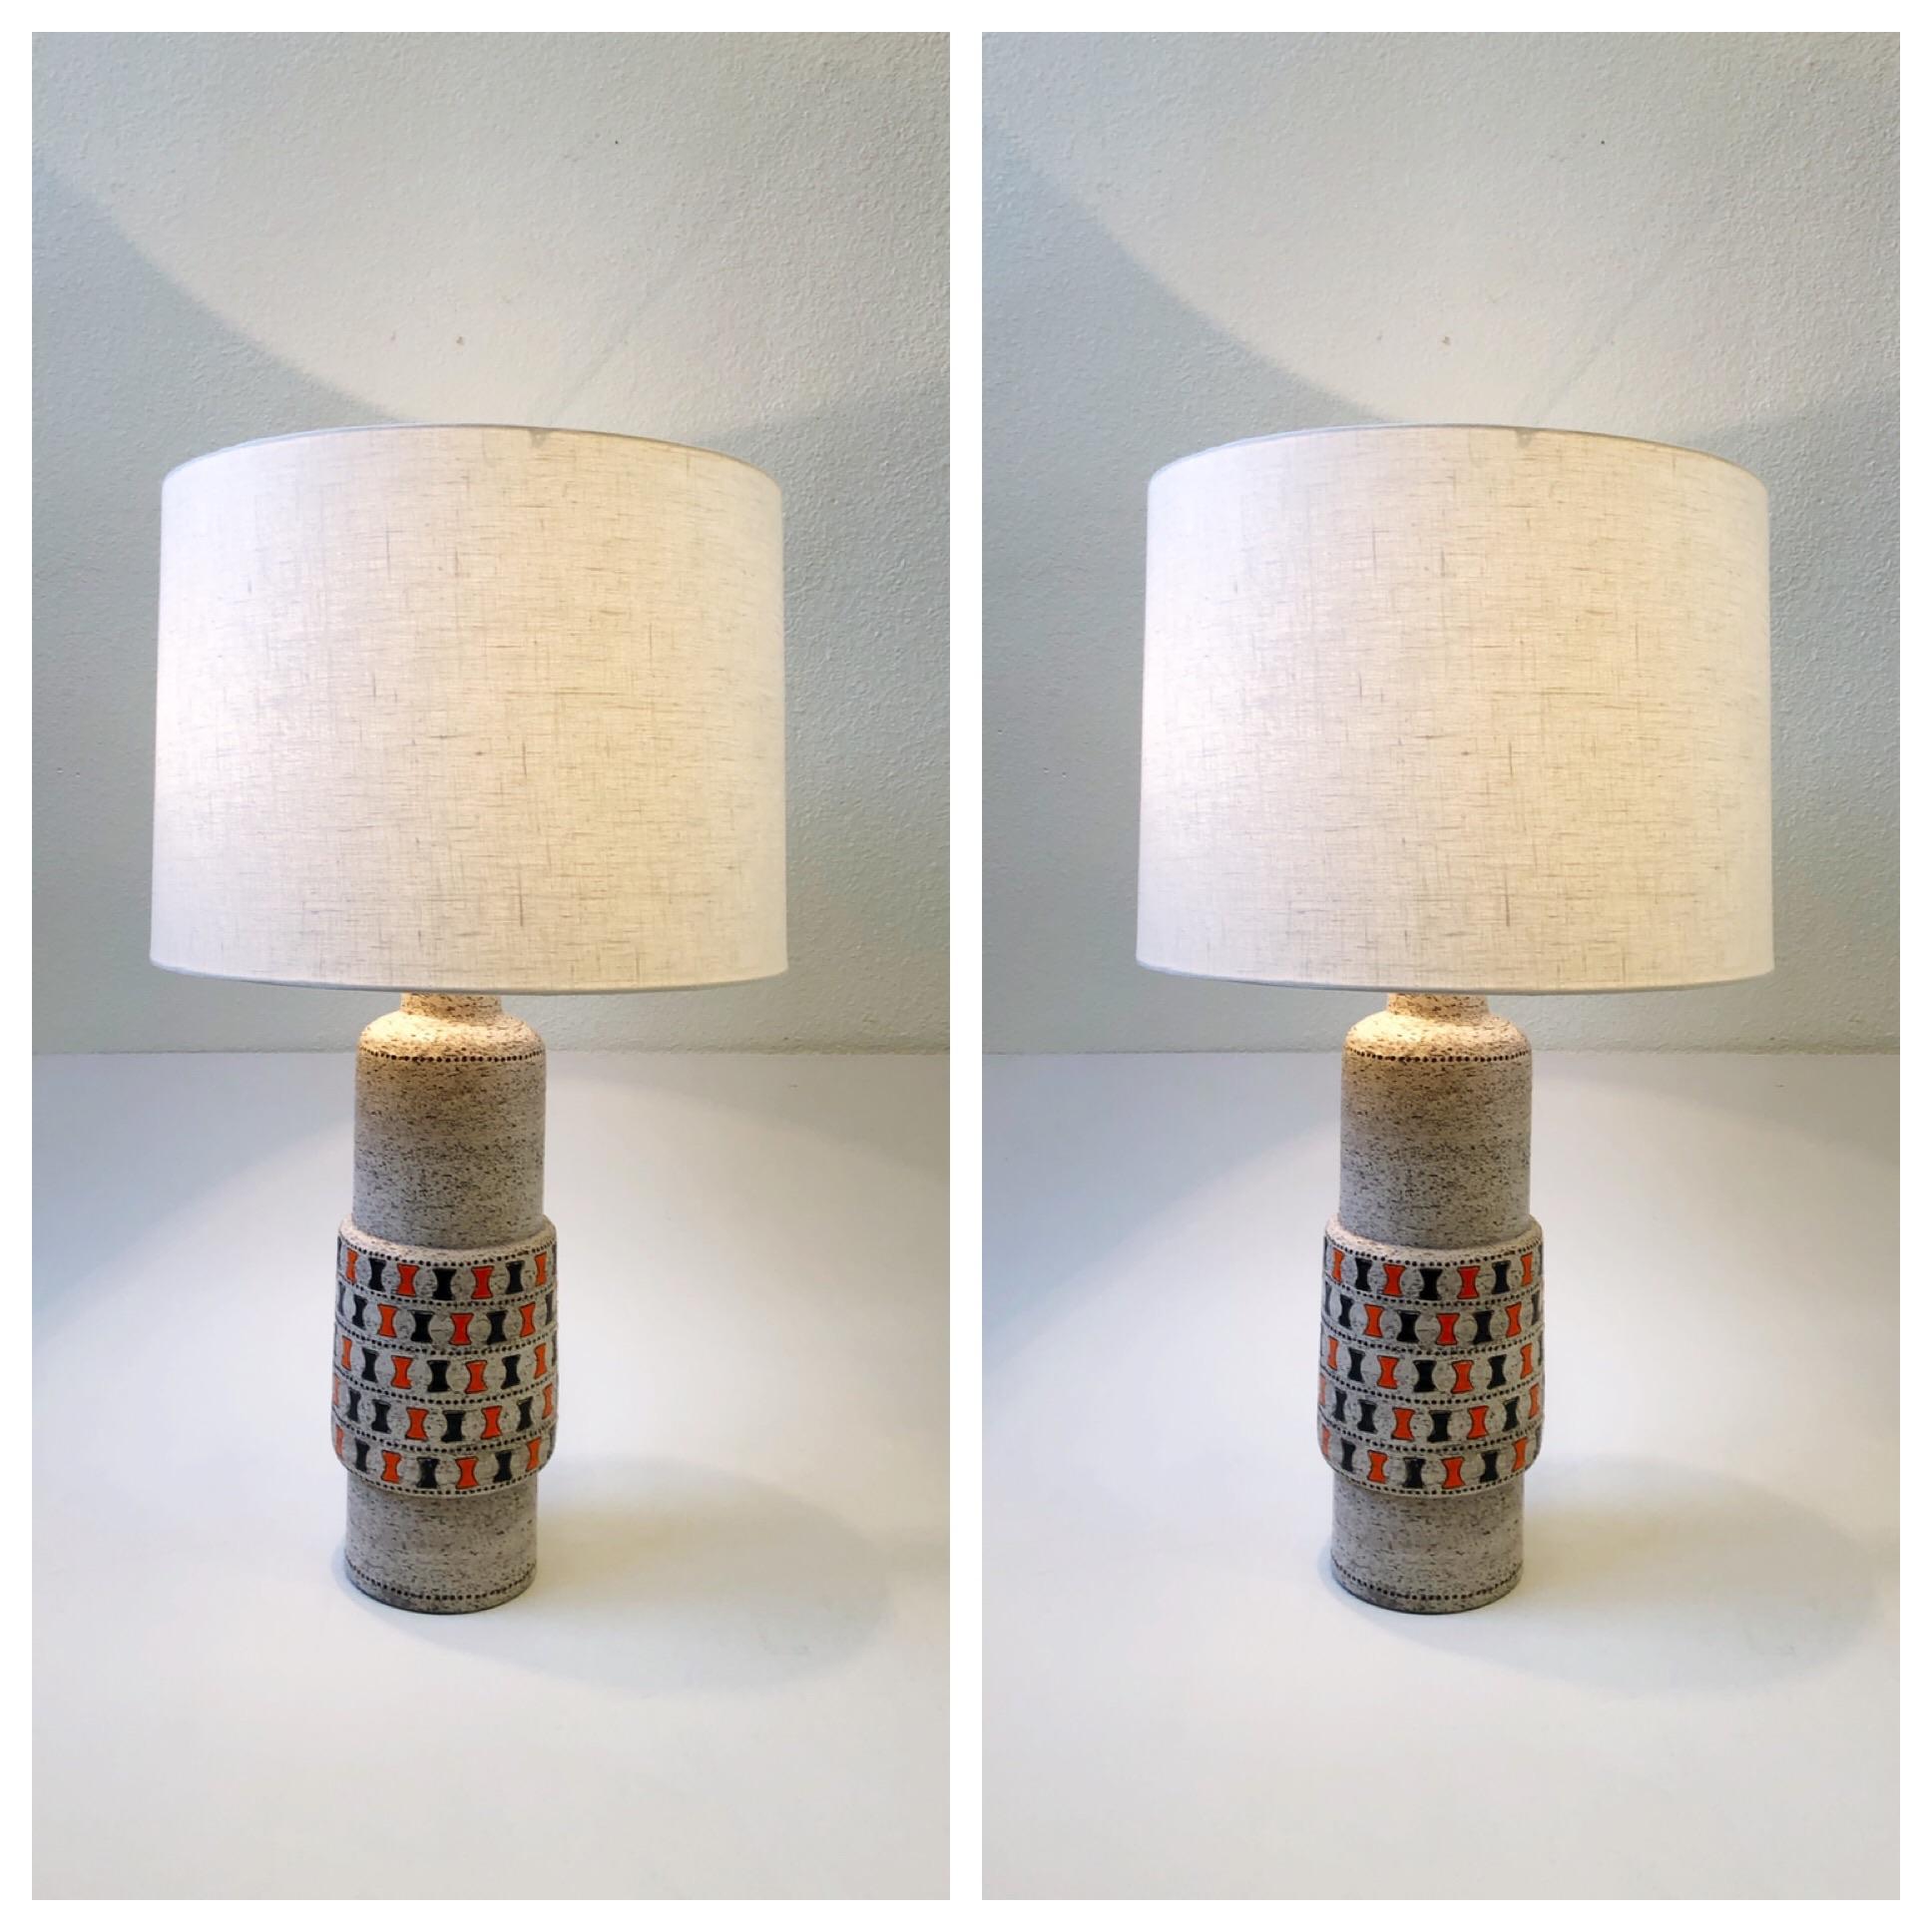 A spectacular 1960’s rare pair of Italian Ceramic black and orange “Dente” Table Lamps by Aldo Londi for 
The lamps have been newly rewired with new polish brass hardware and new vanilla linen drum shades. 
Overall dimensions: 31.5” high 18”